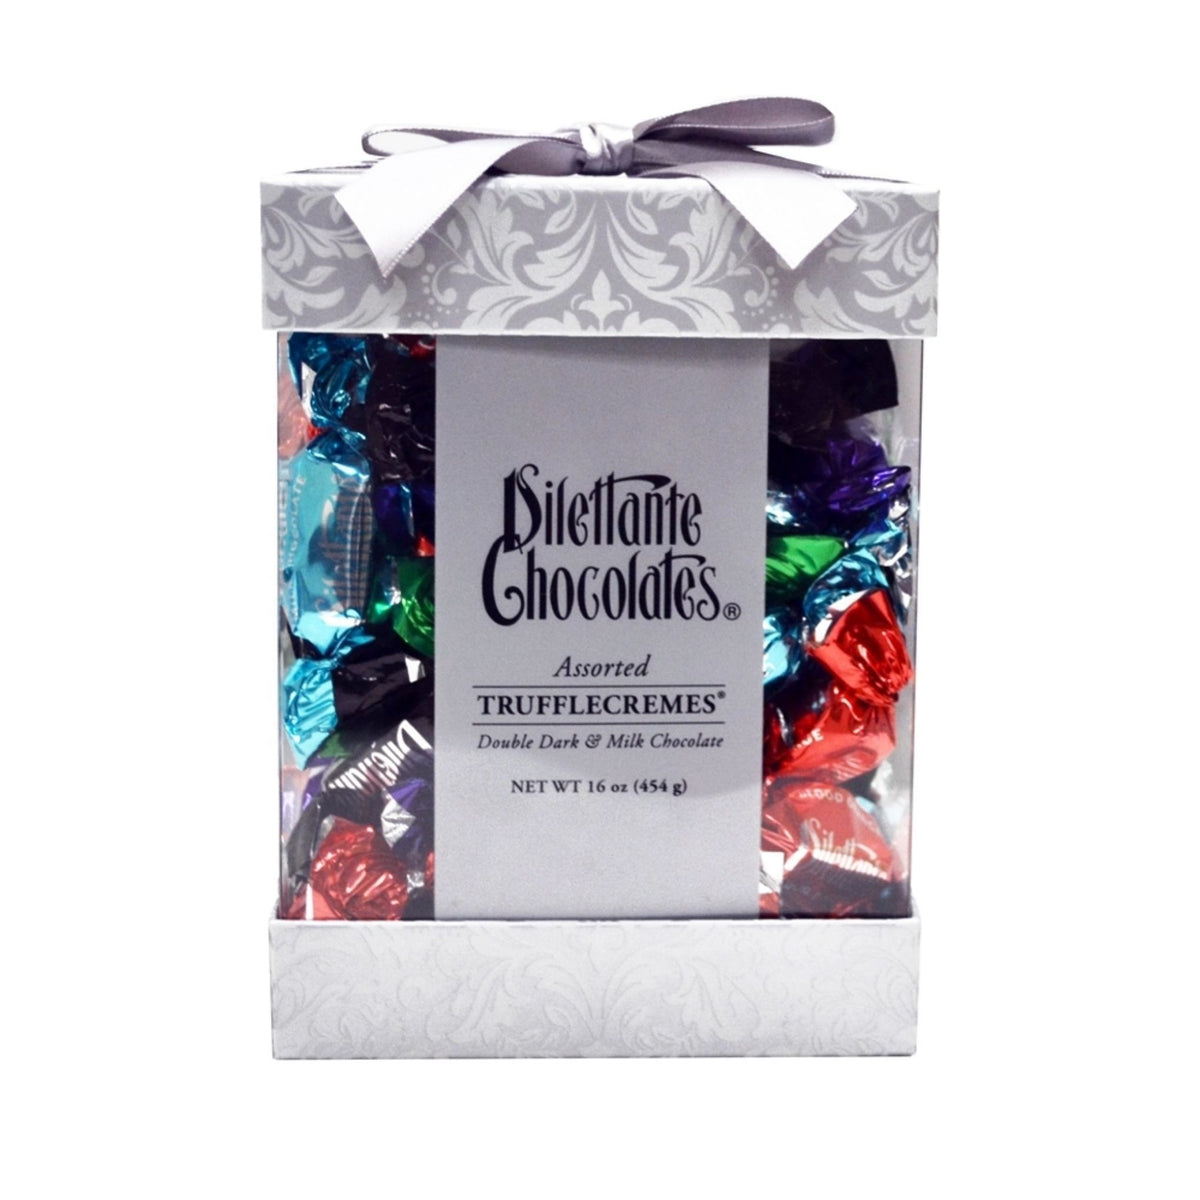 Dilettante Chocolates TruffleCreme Gift Box Wrapped in Beautiful Silver Packaging